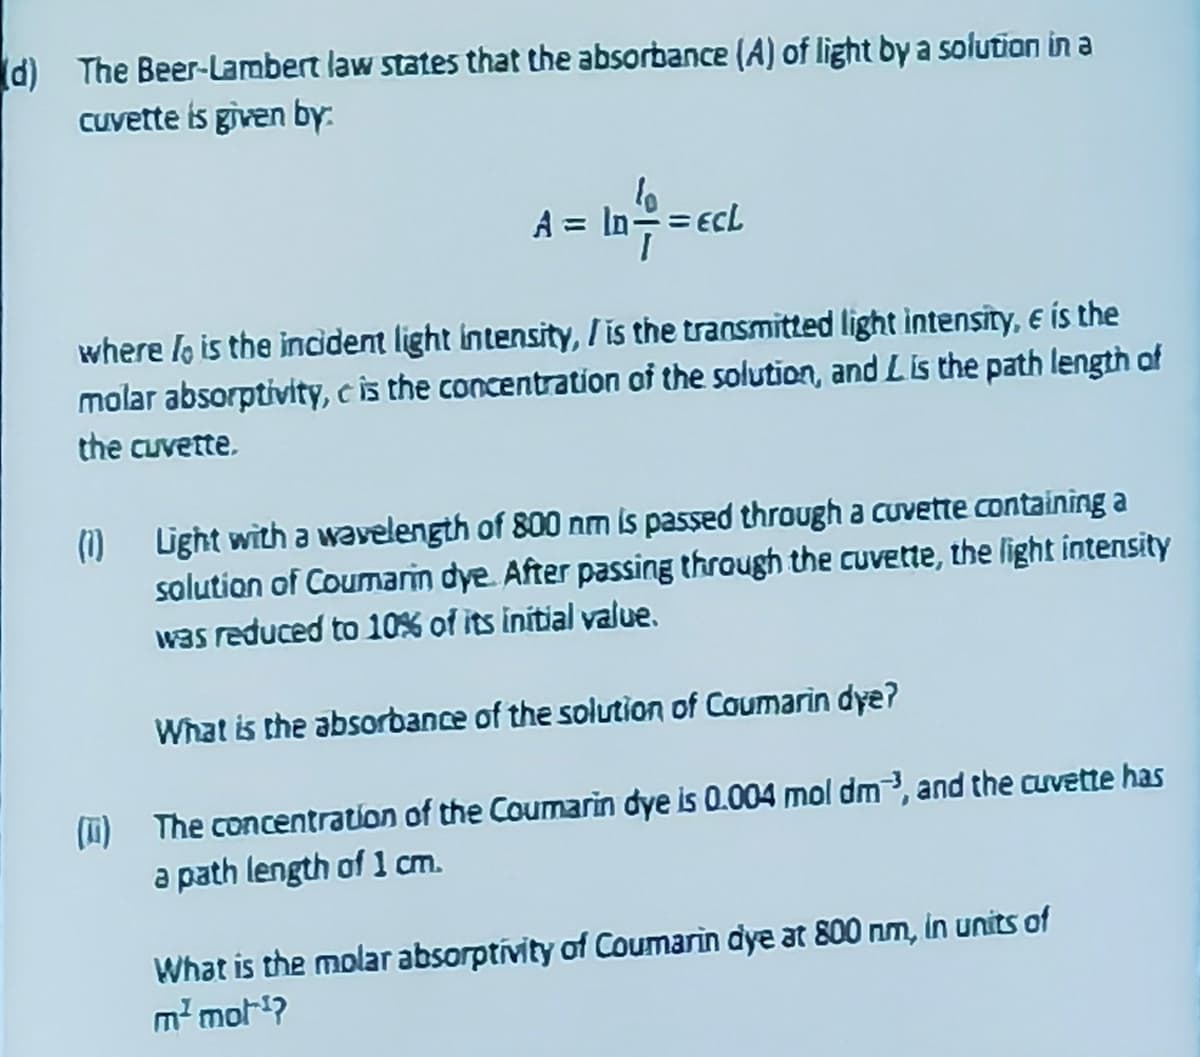 (d) The Beer-Lambert law states that the absorbance (A) of light by a solution in a
cuvette is given by.
A = ID==ecL
In=-=
where lo is the incident light intensity, / is the transmitted light intensity, e is the
molar absorptivity, c is the concentration of the solution, and Lis the path length of
the cuvette.
(1) Light with a wavelength of 800 nm is passed through a cuvette containing a
solution of Coumarin dye. After passing through the cuvette, the light intensity
was reduced to 10% of its initial value.
What is the absorbance of the solution of Coumarin dye?
(1) The concentration of the Coumarin dye is 0.004 mol dm3, and the cuvette has
a path length of 1 cm.
What is the molar absorptivity of Coumarin dye at 800 nm, in units of
m² mot¹?